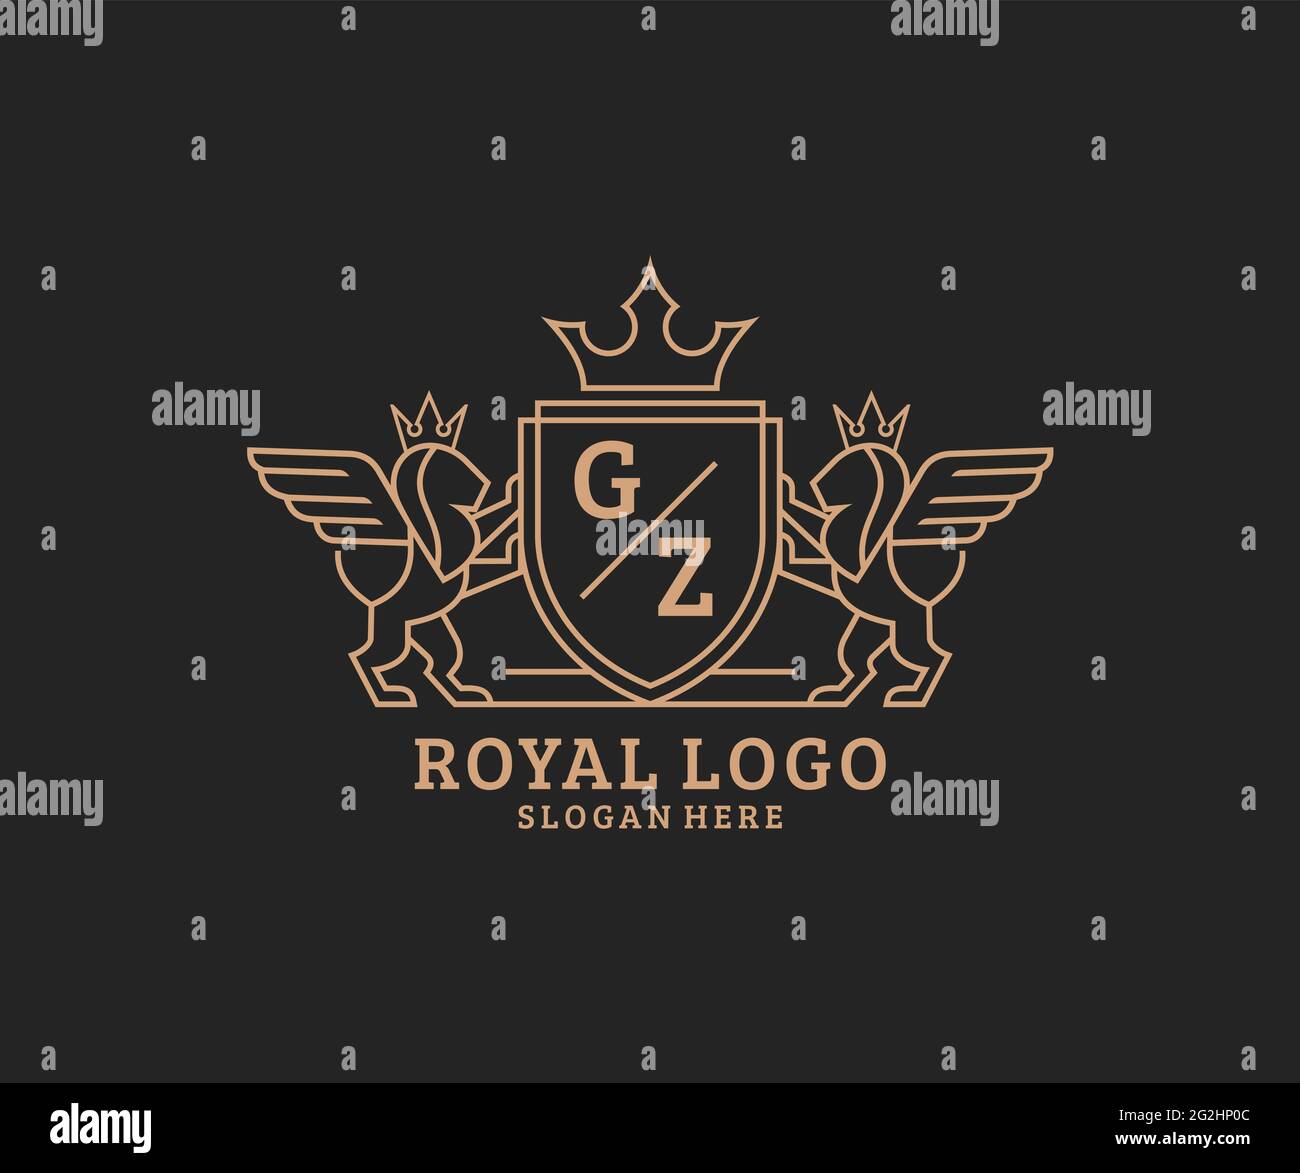 GZ Letter Lion Royal Luxury Heraldic,Crest Logo template in vector art for Restaurant, Royalty, Boutique, Cafe, Hotel, Heraldic, Jewelry, Fashion and Stock Vector